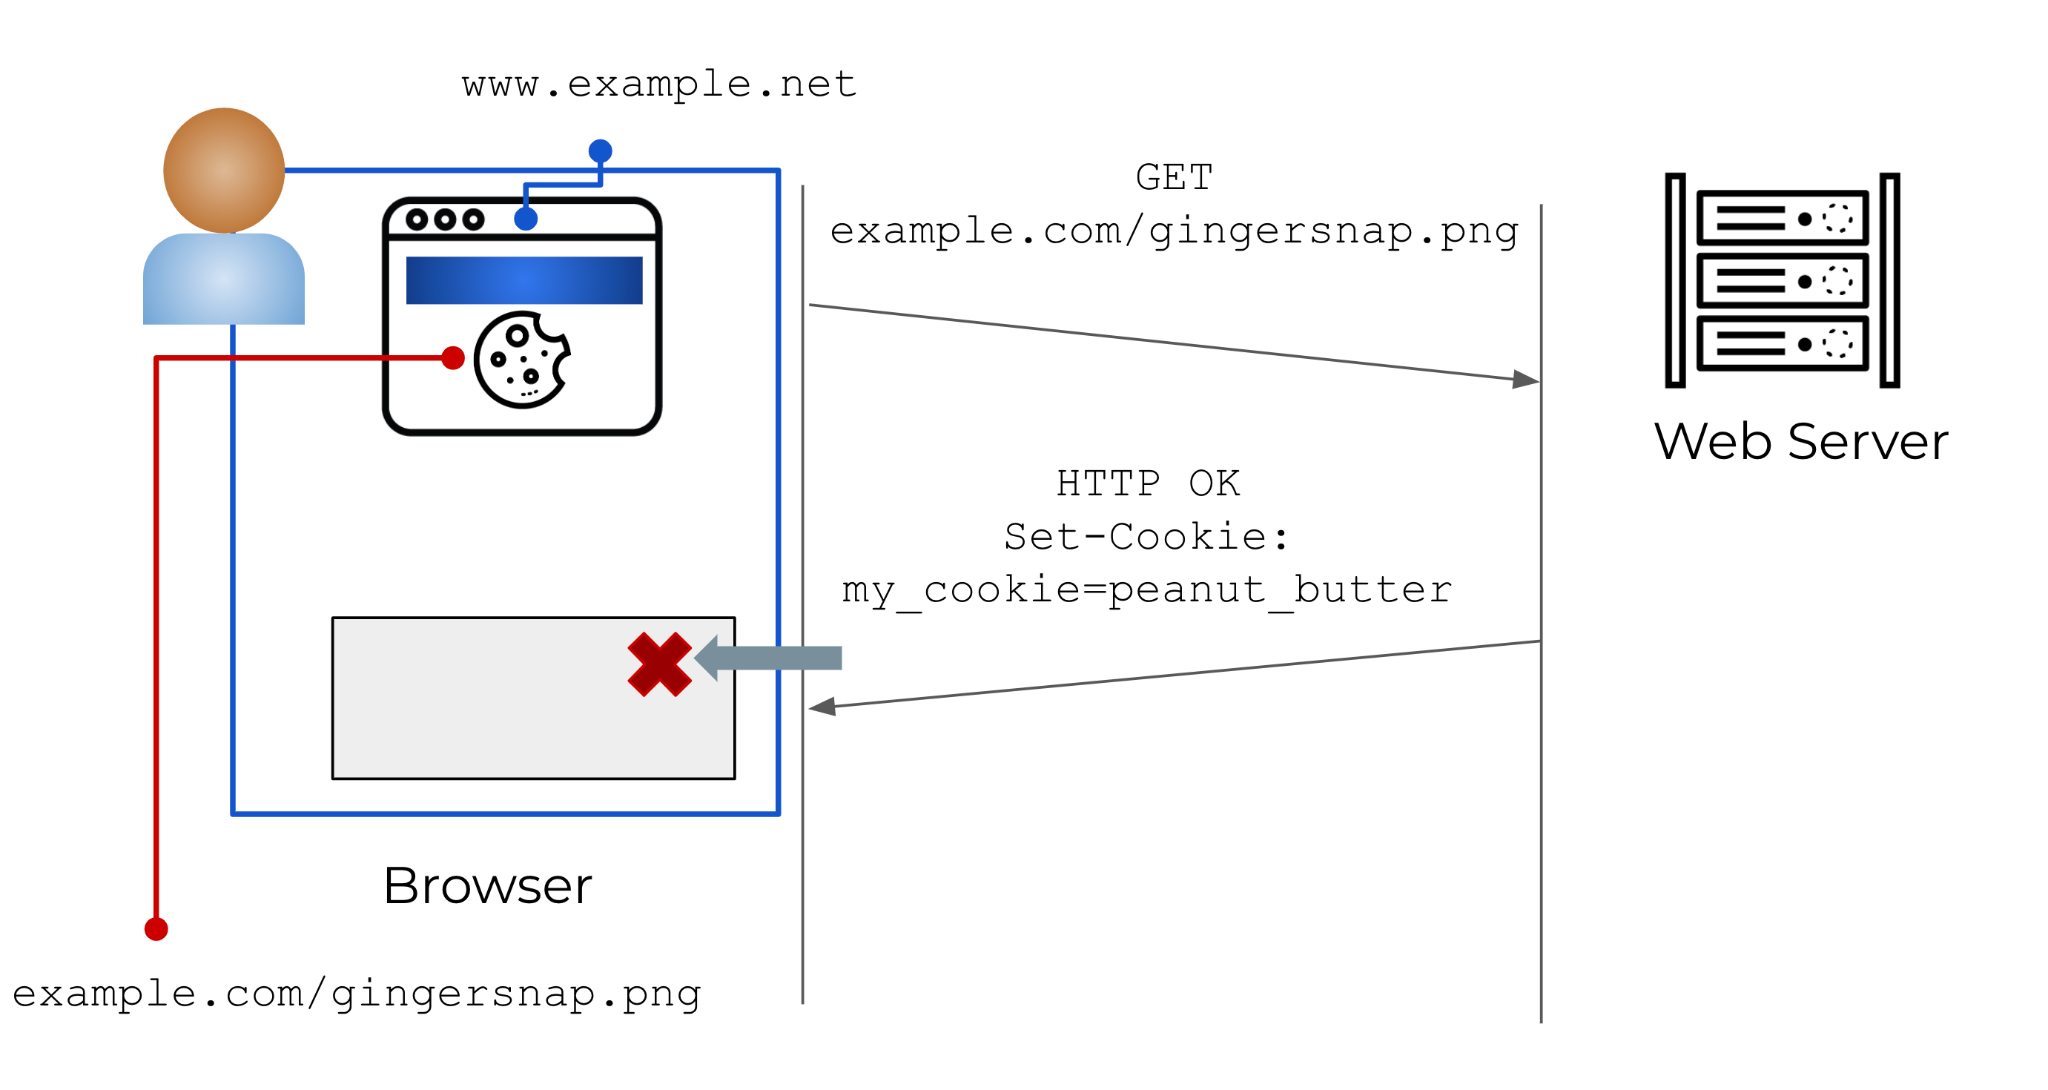 The user pictured browses to www[.]example[.]com. An HTTP Get request is sent to the site's webservers, and the owner has configured them to send users cookies in response. In this example, the cookie "my_cookies" is set to the value "peanut_butter." When the user in this example browses to other pages on this domain, the messages that she sends will include the cookie "peanut_butter," allowing her movements on the site to be tracked.